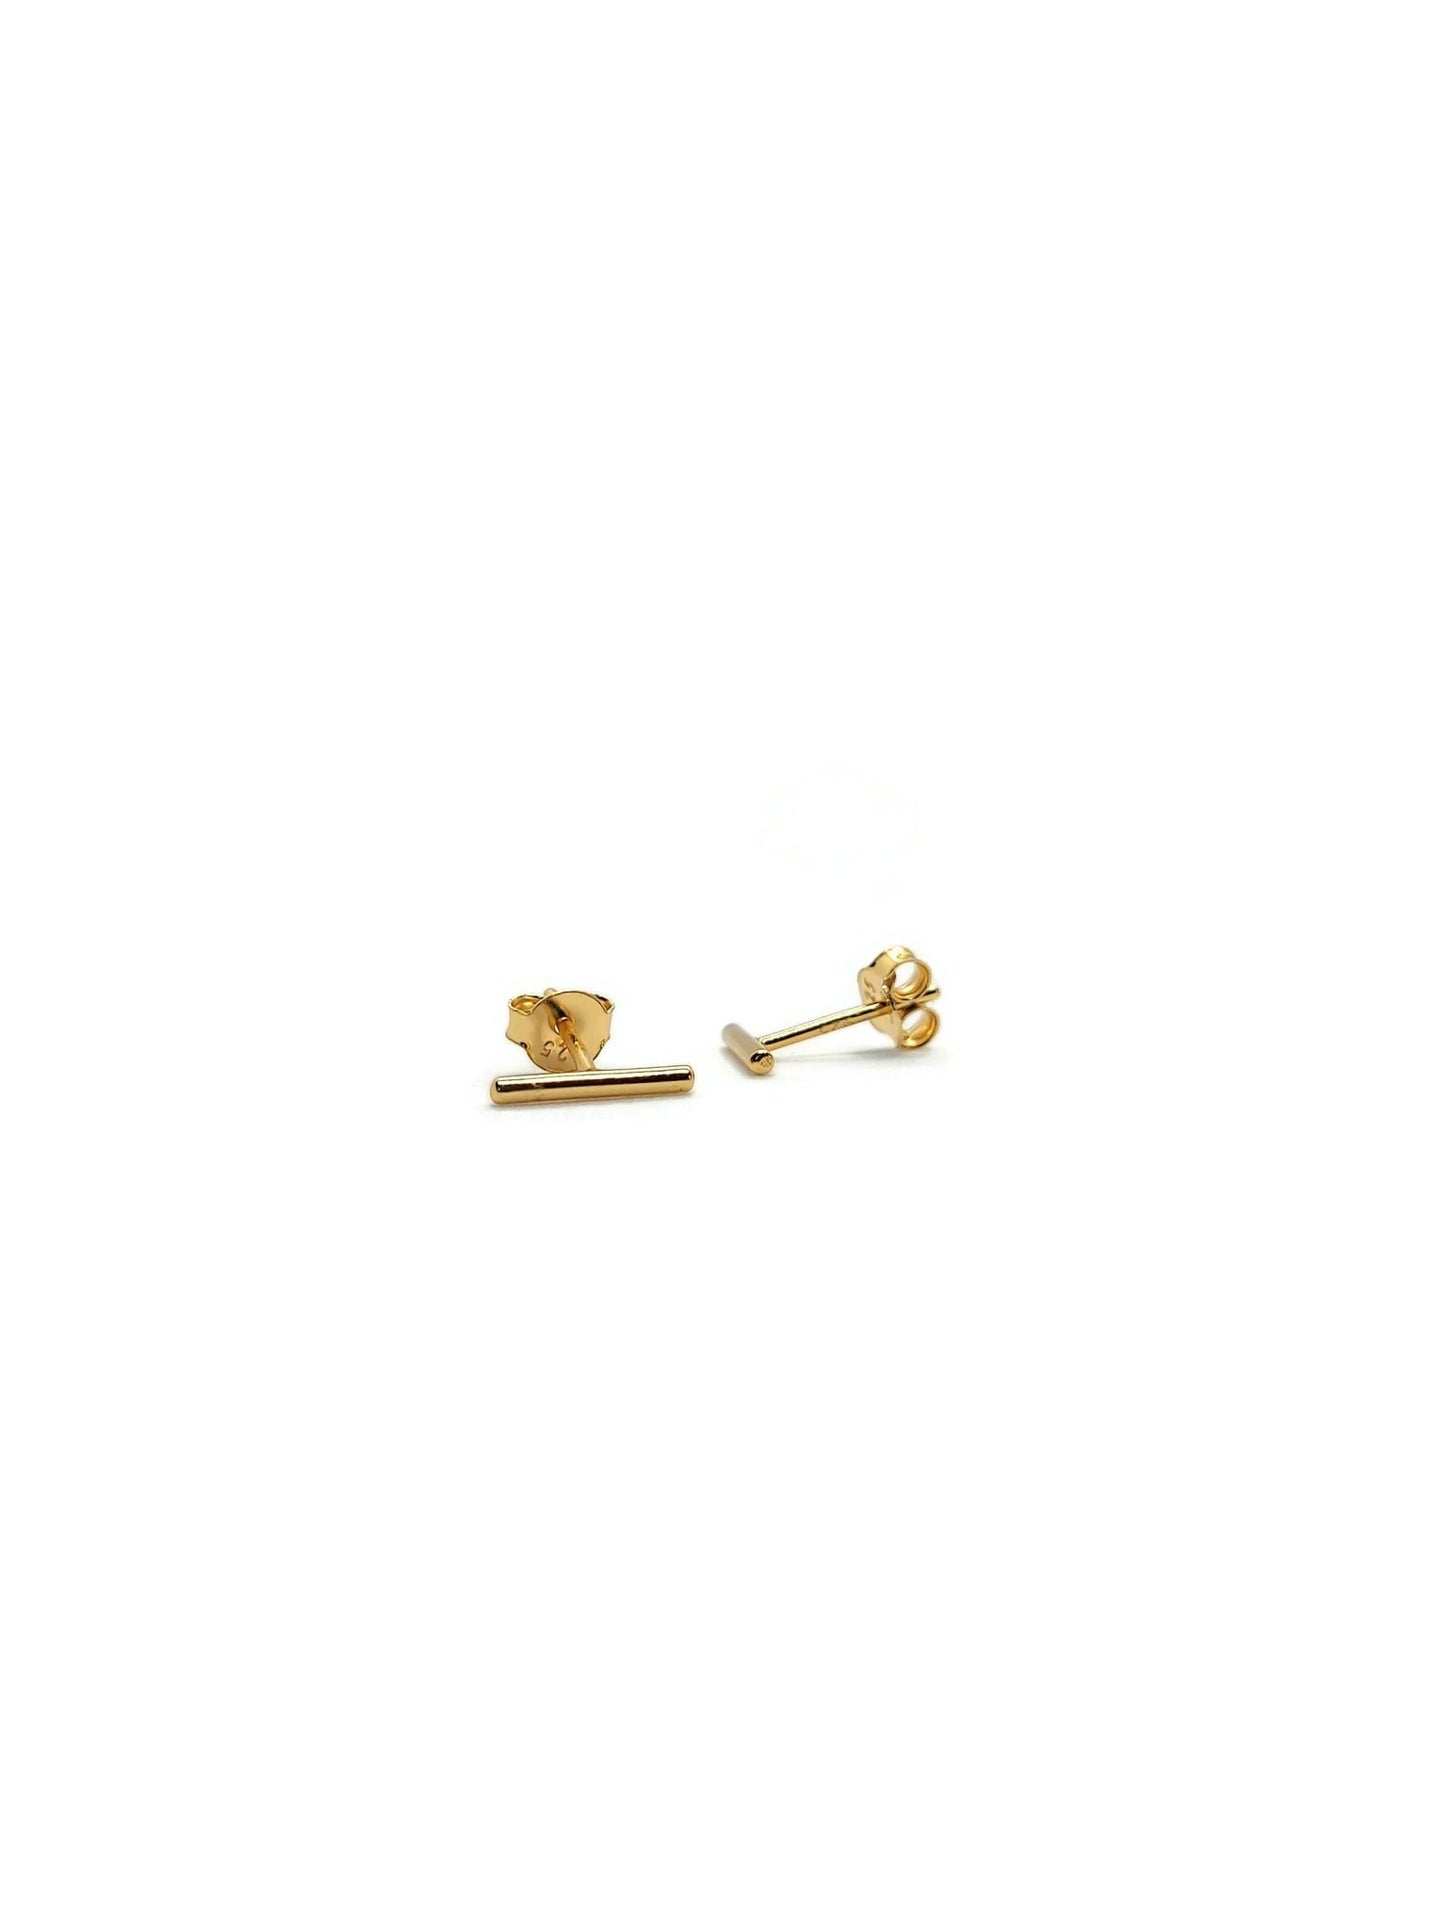 gold stick stud post earrings. gold vermeil. gold plated silver2